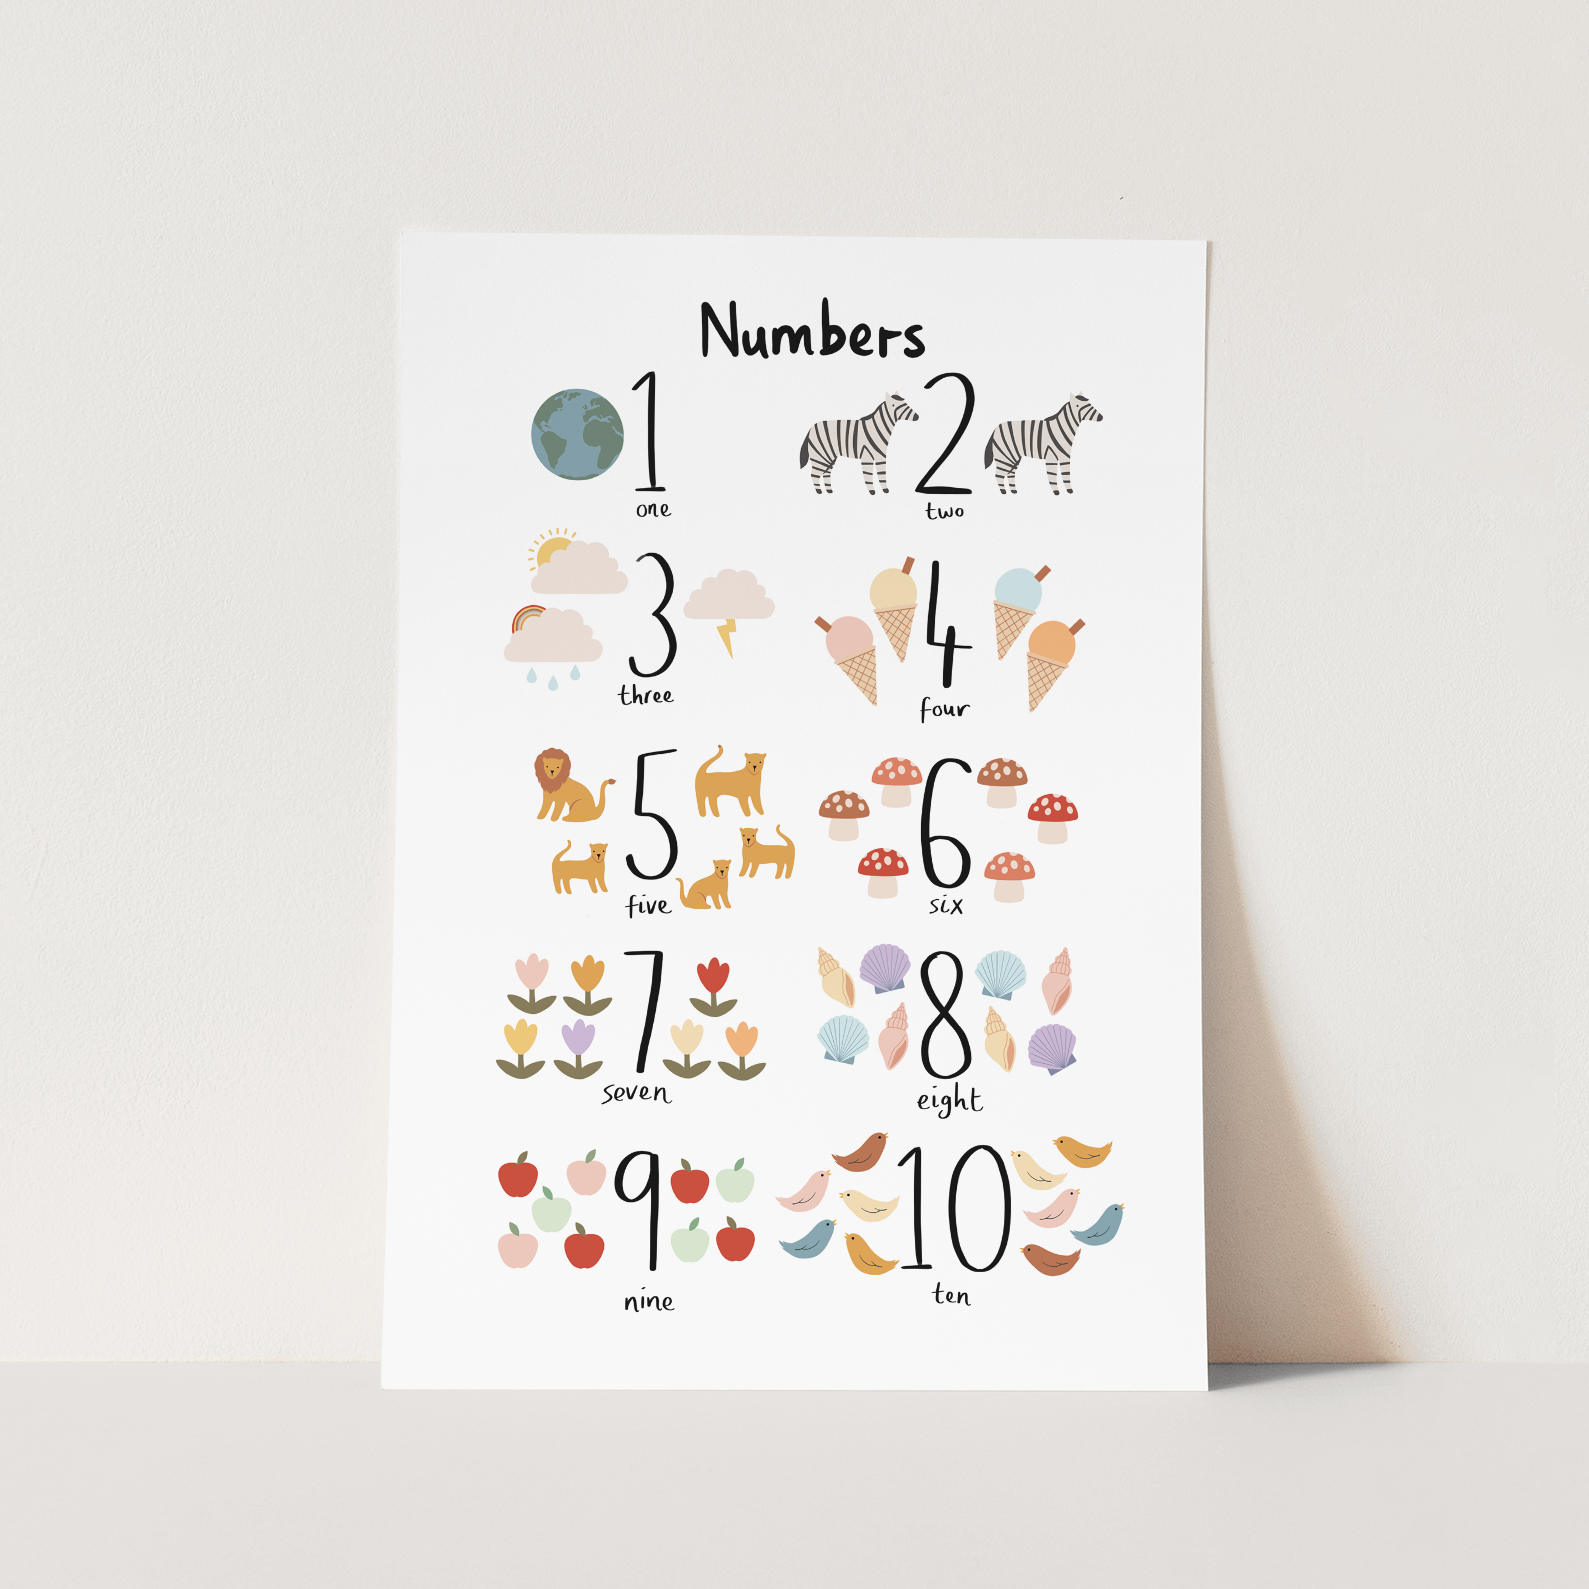 Numbers Art Print by Kid of the Village (6 Sizes Available)